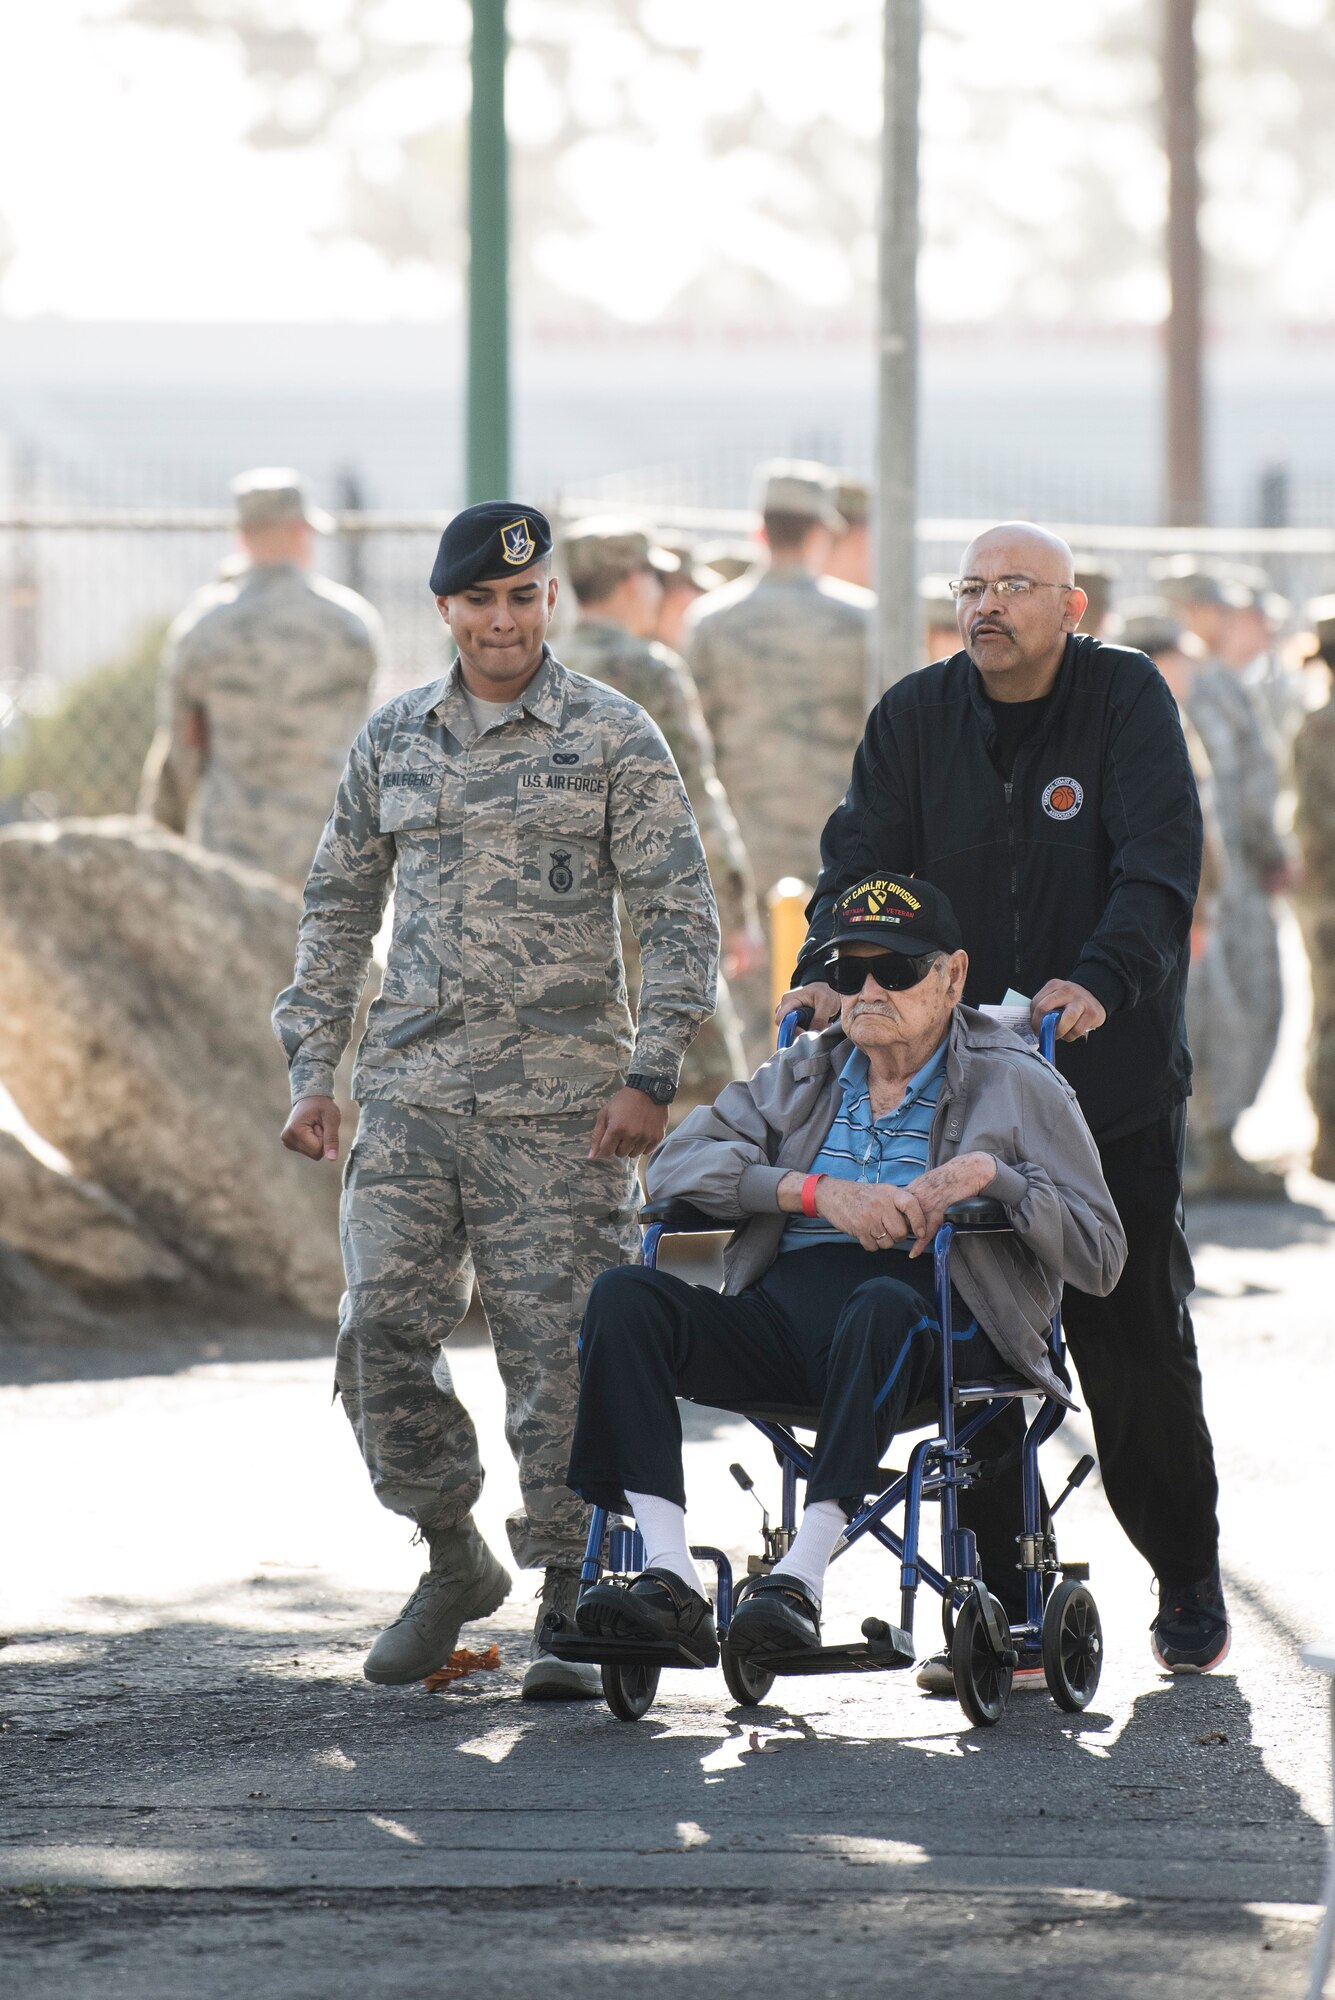 Airman 1st Class Jonathan Realegeno, 30th Security Forces Squadron defender, accompanies a veteran during the 2019 Santa Barbara County Veteran Stand Down event Oct. 19, 2019, in Santa Maria, Calif. The Veteran Stand Down is an annual event dedicated to helping veterans, homeless veterans and the family of veterans by providing them with an array of services, food and the opportunity to connect with other veterans and active duty members. (U.S. Air Force photo by Airman 1st Class Hanah Abercrombie)